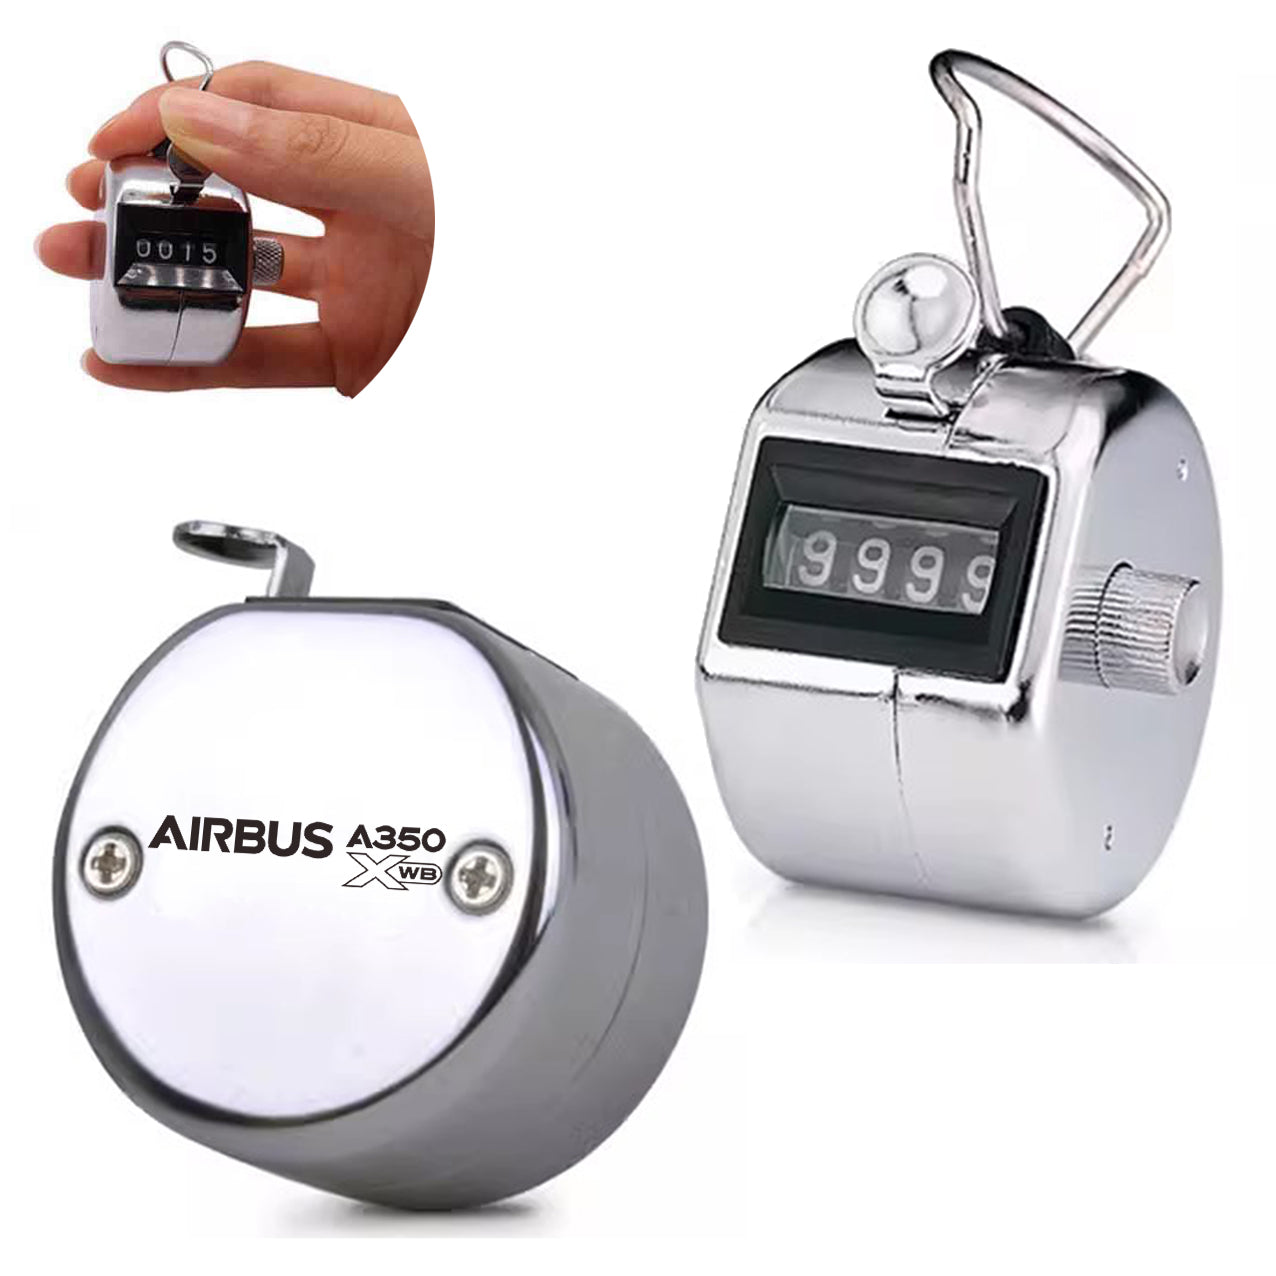 The Airbus A350 WXB Designed Metal Handheld Counters